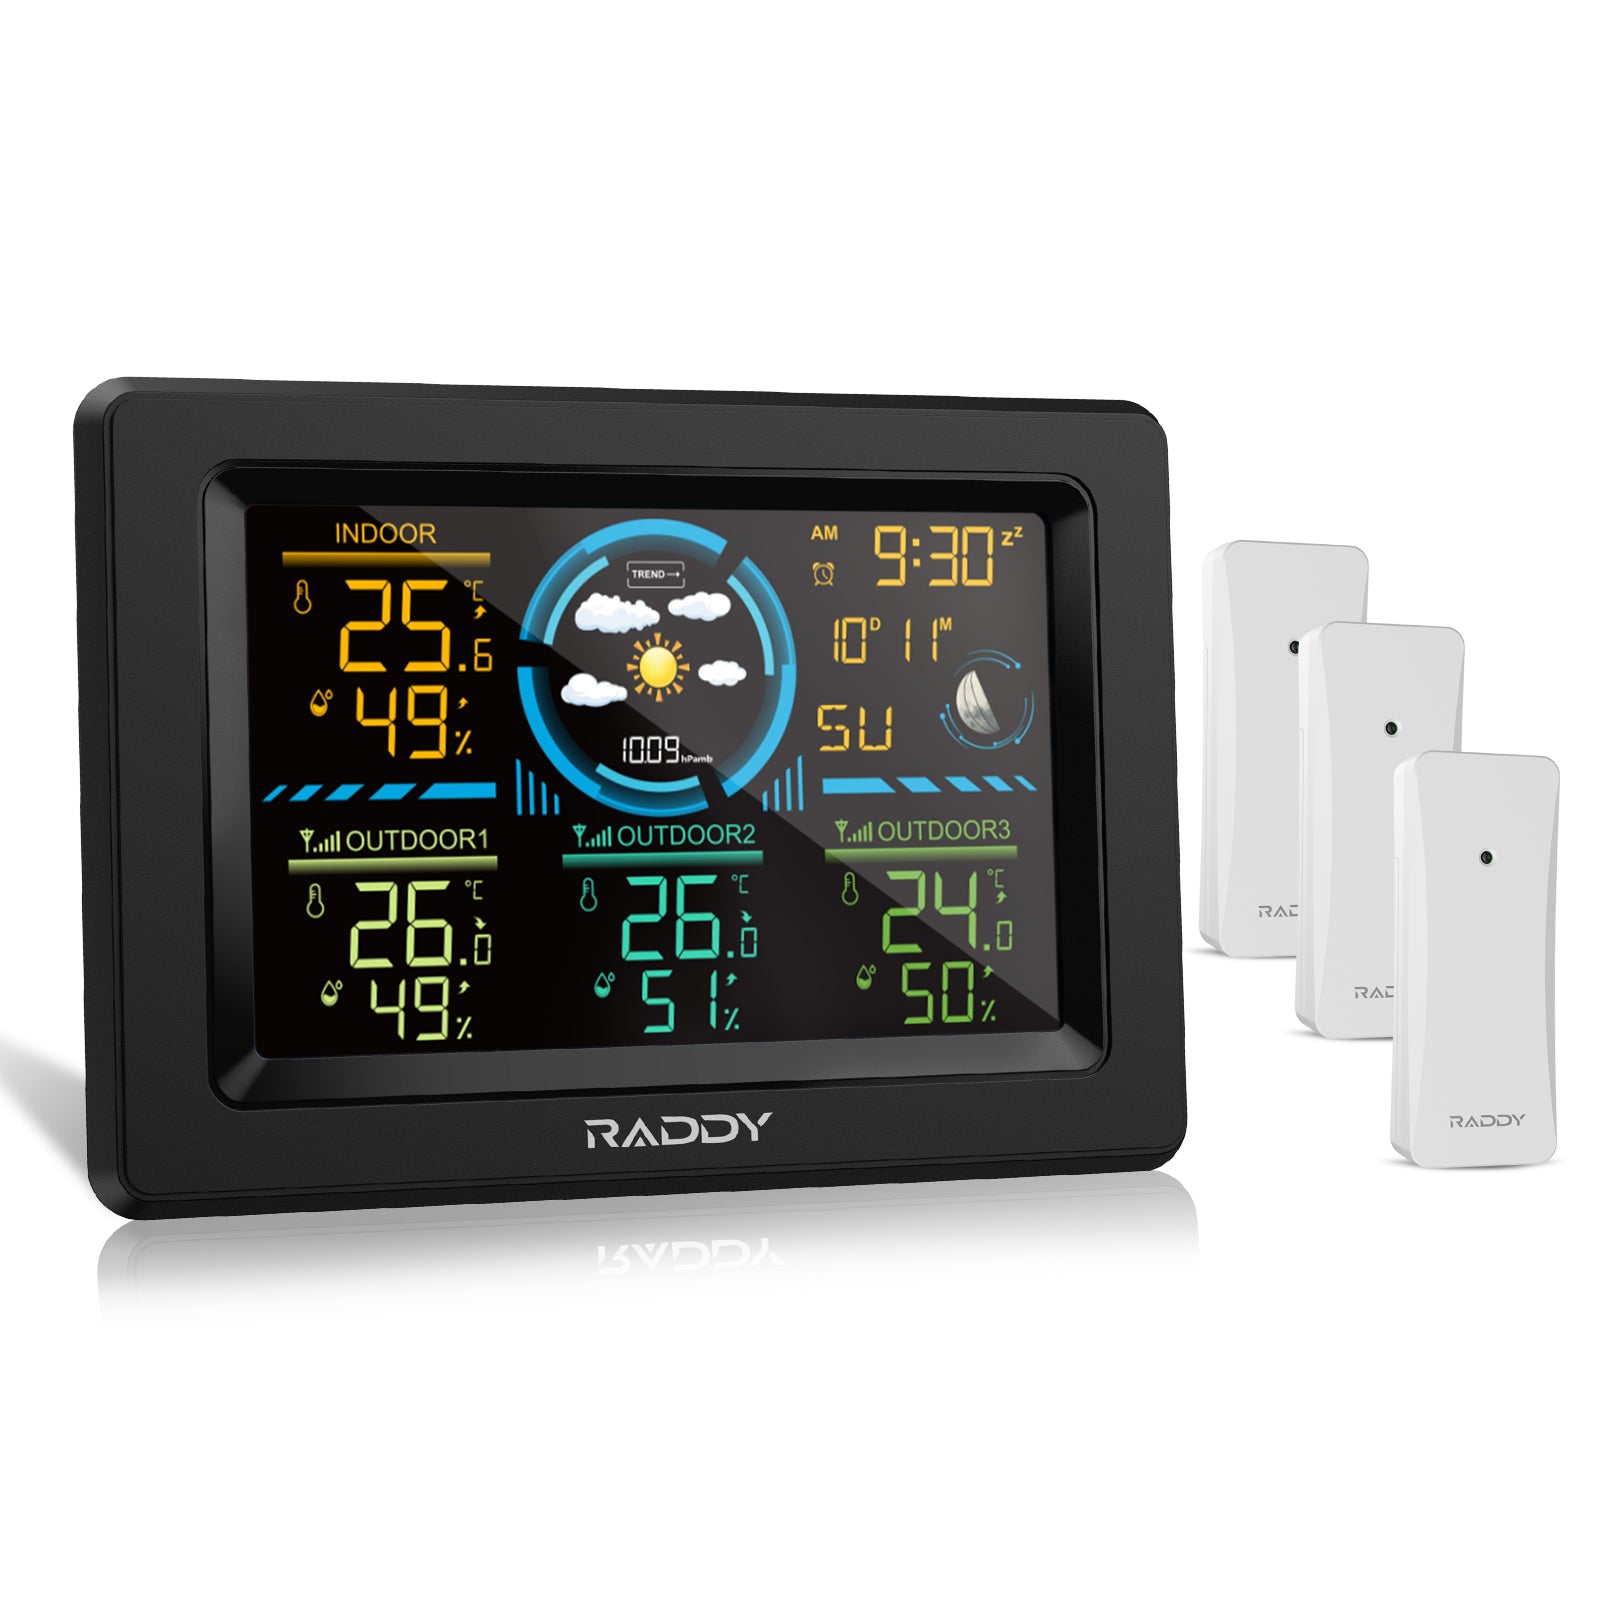 Acurite Weather Station with 5-in-1 Wireless Remote Sensor